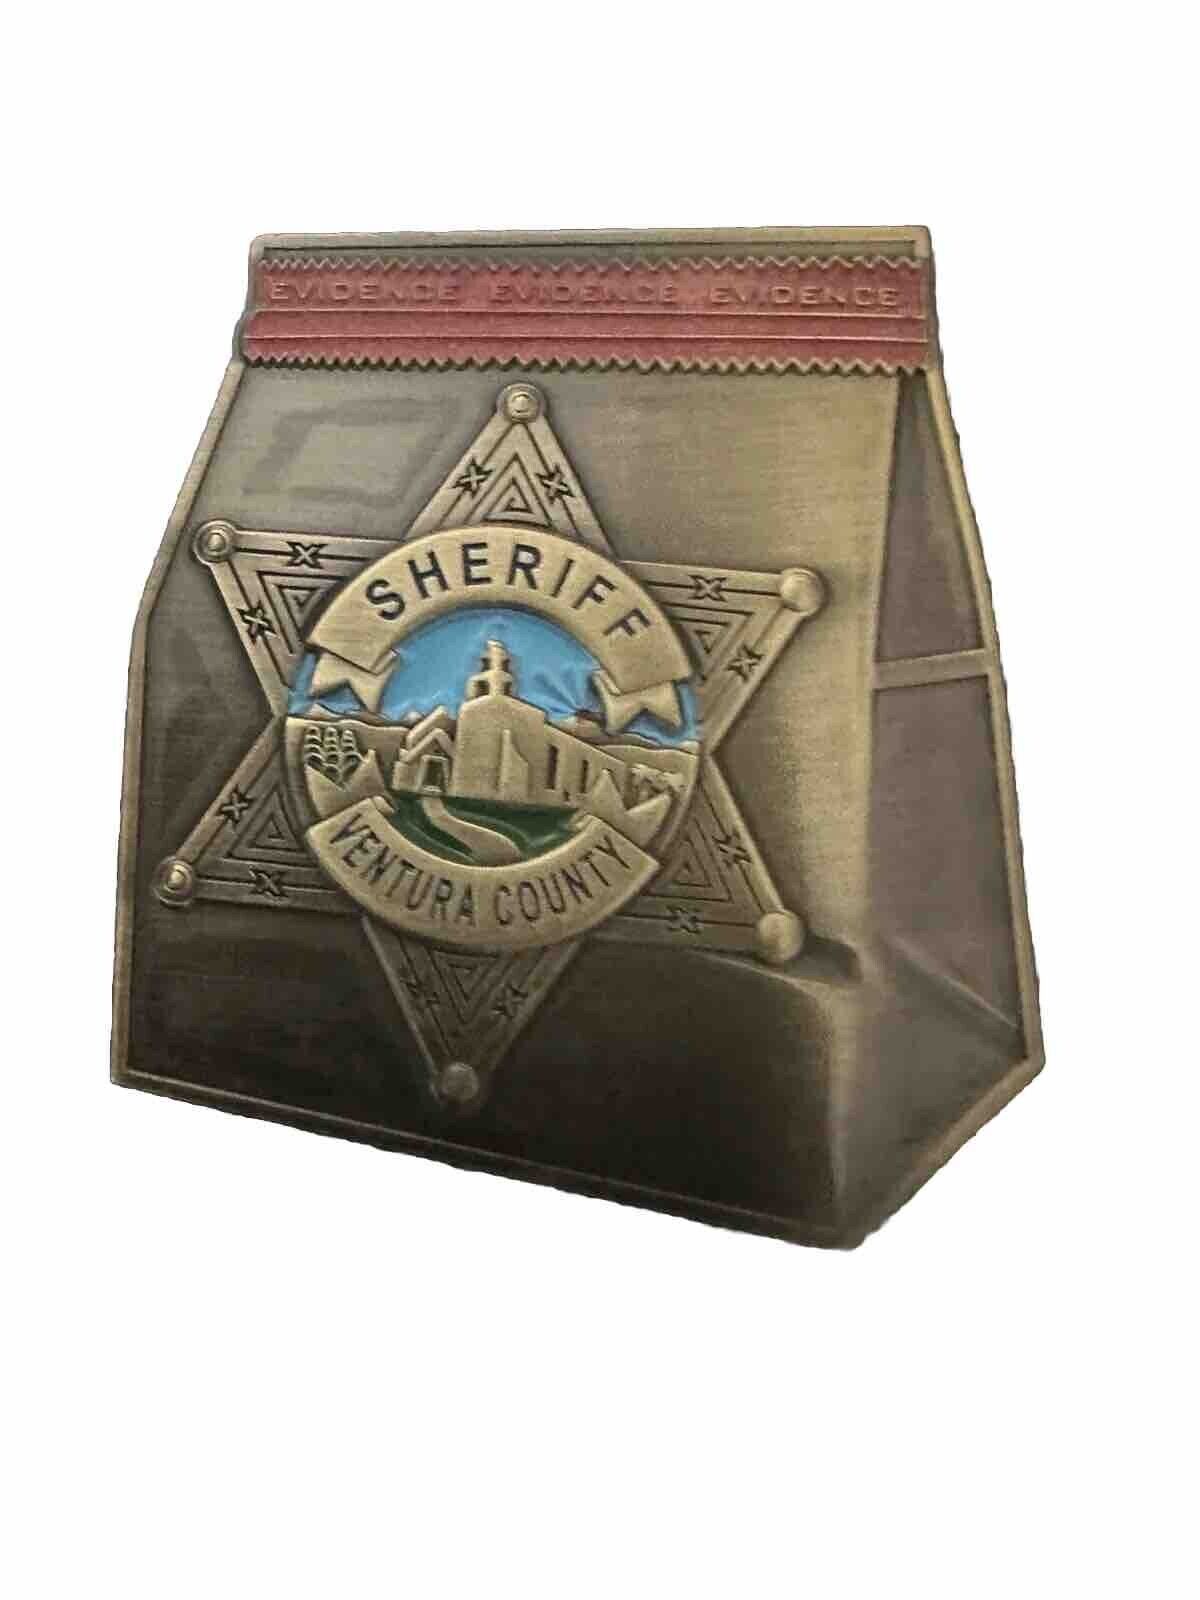 Ventura County Sheriff Challenge Coin “Evidence Bag”